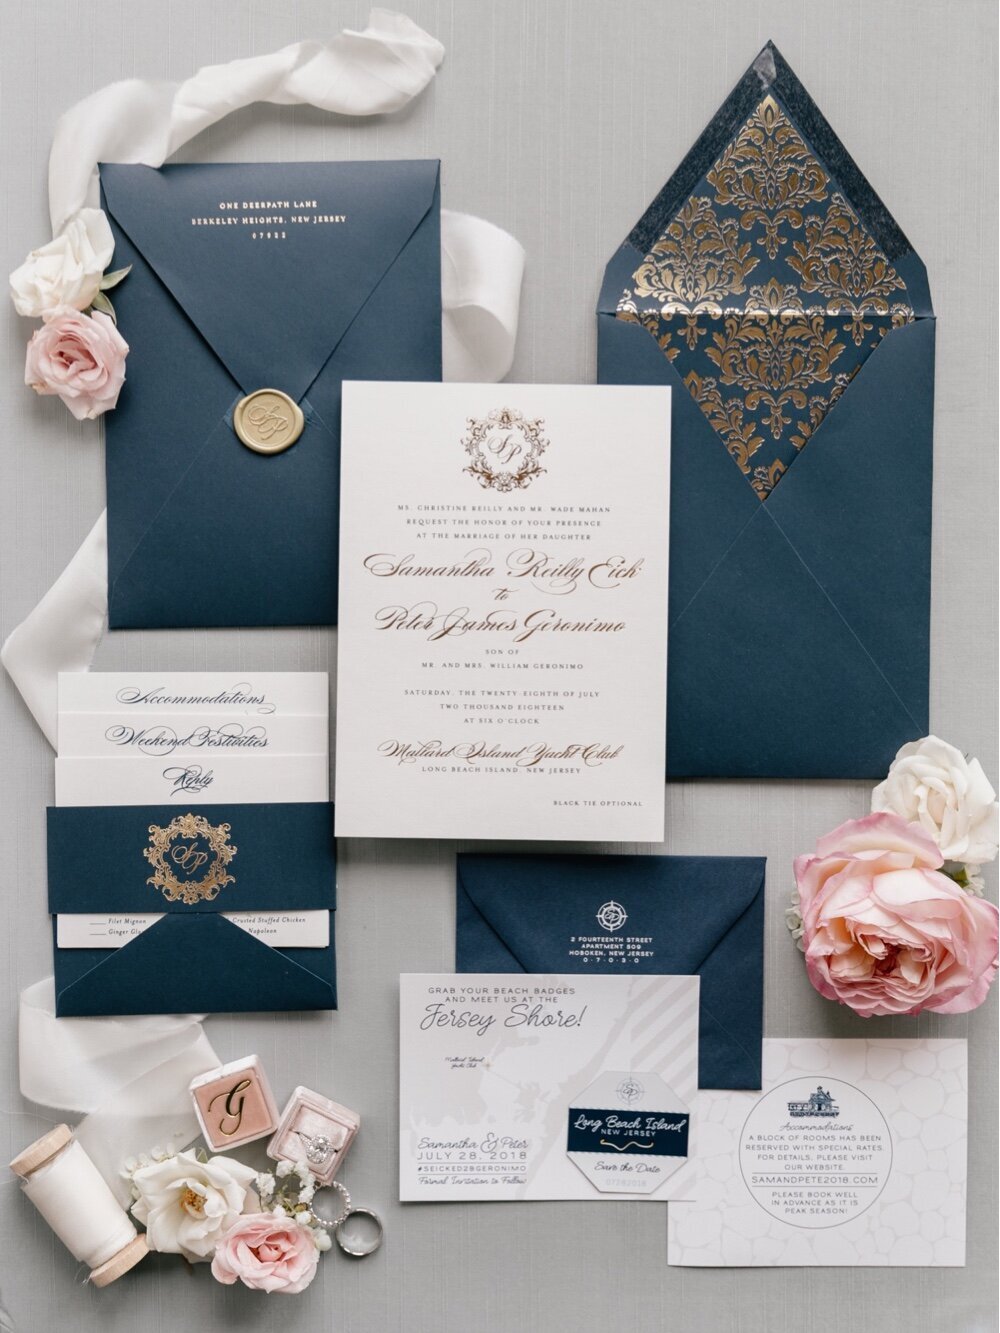 143_blue-and-gold-wedding-invitations_stationary_wedding-stationary_wedding-invitations